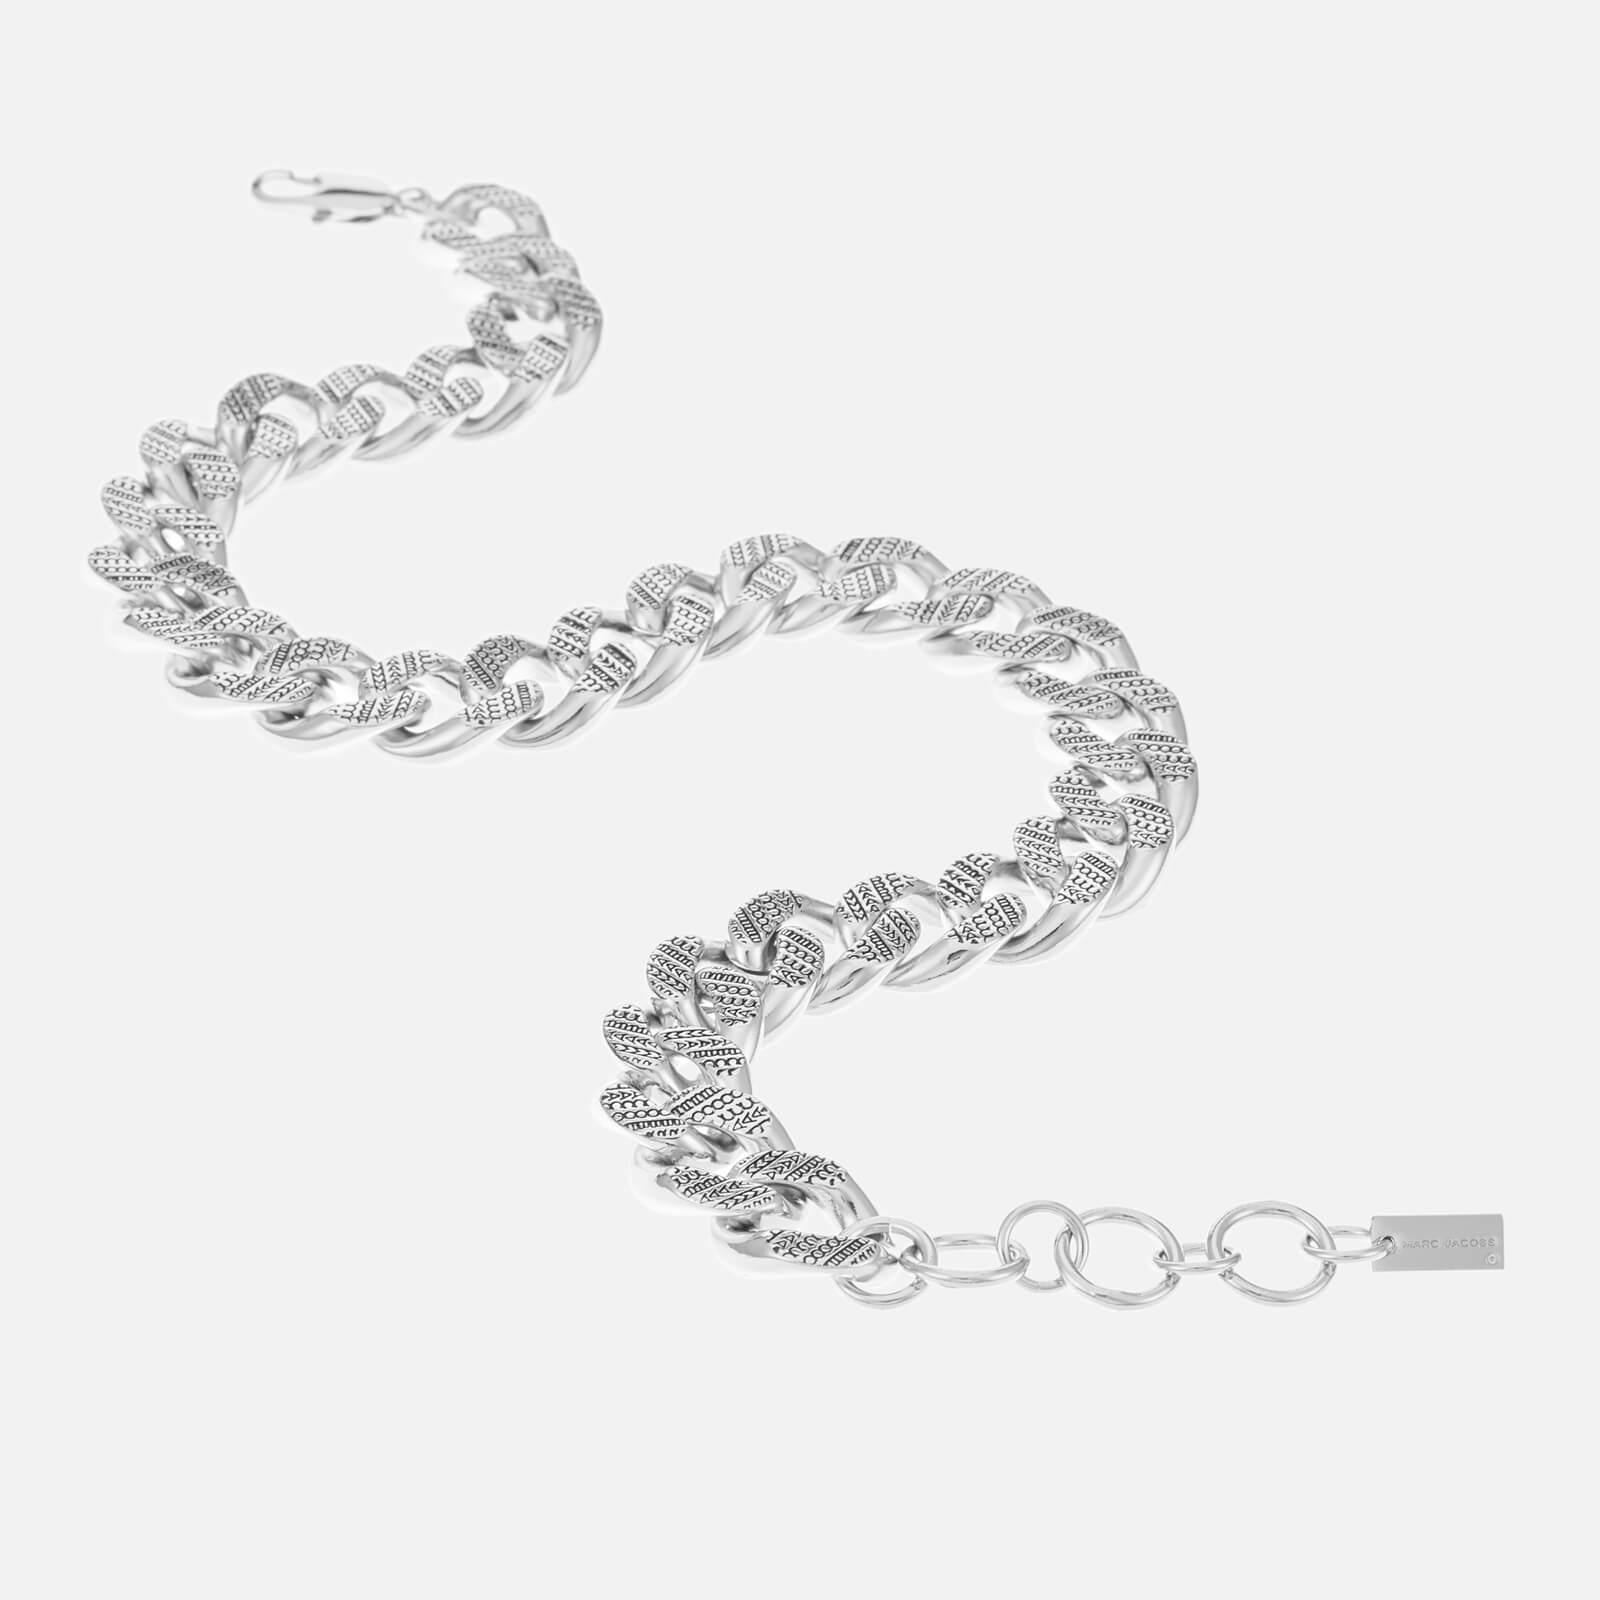 Marc Jacobs Silver 'The Monogram Chain' Necklace